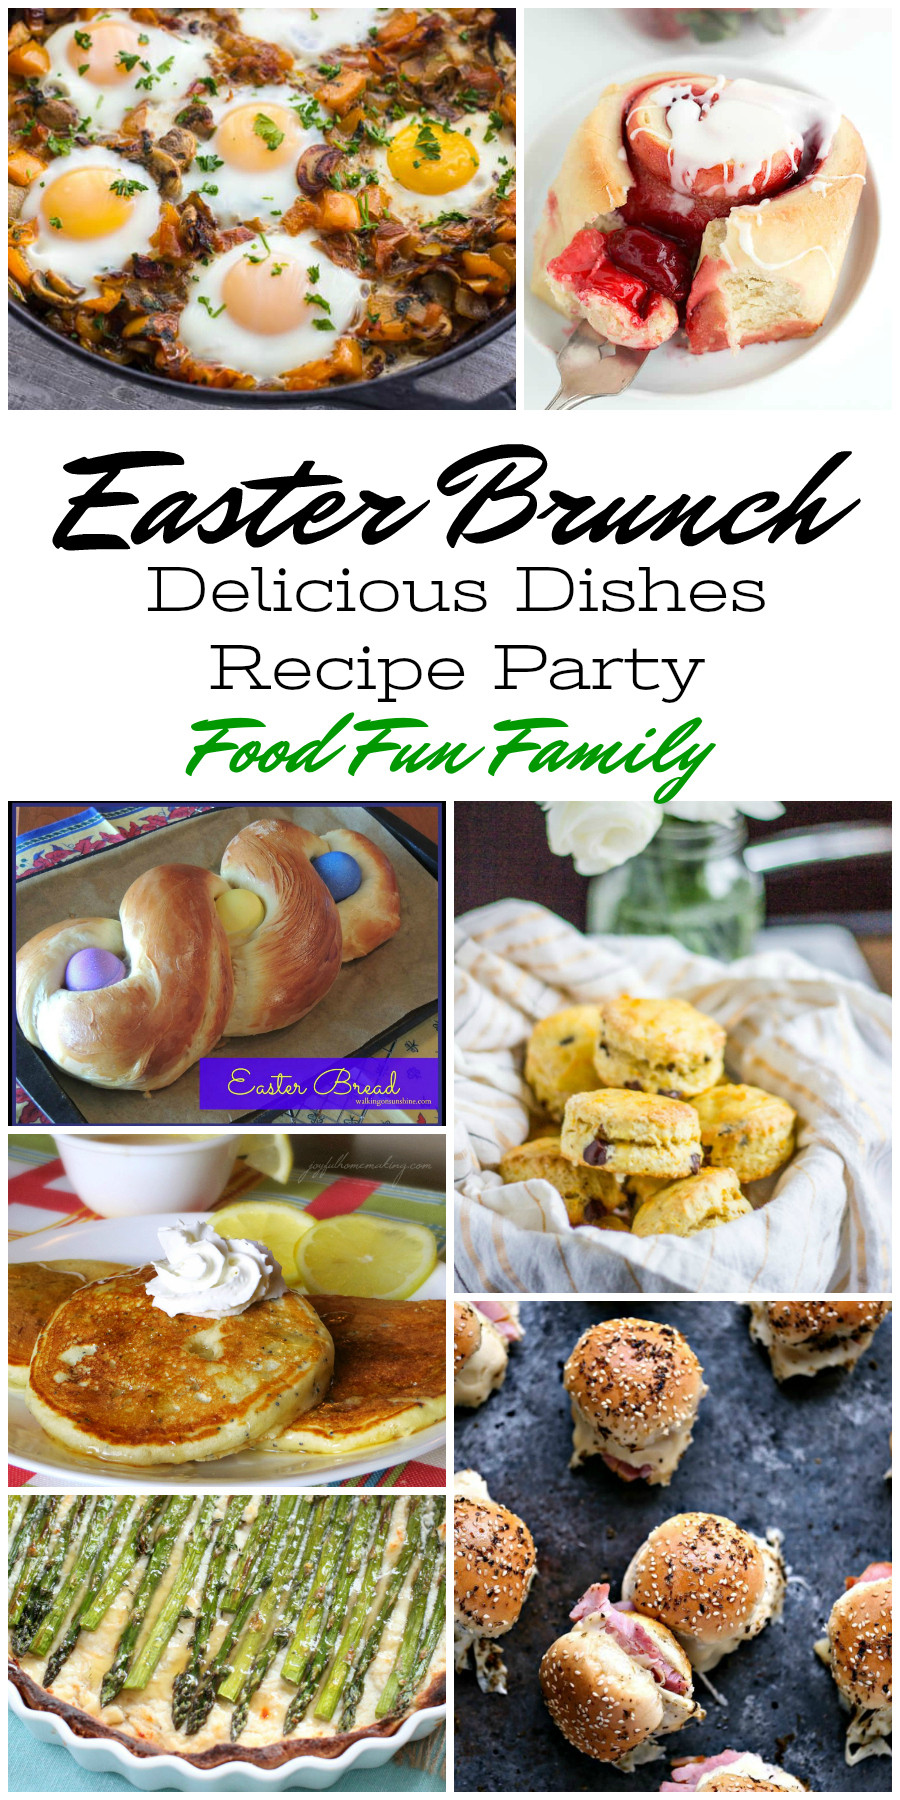 Easter Party Food Ideas Pinterest
 Easter Brunch Recipes – Delicious Dishes Recipe Party 108